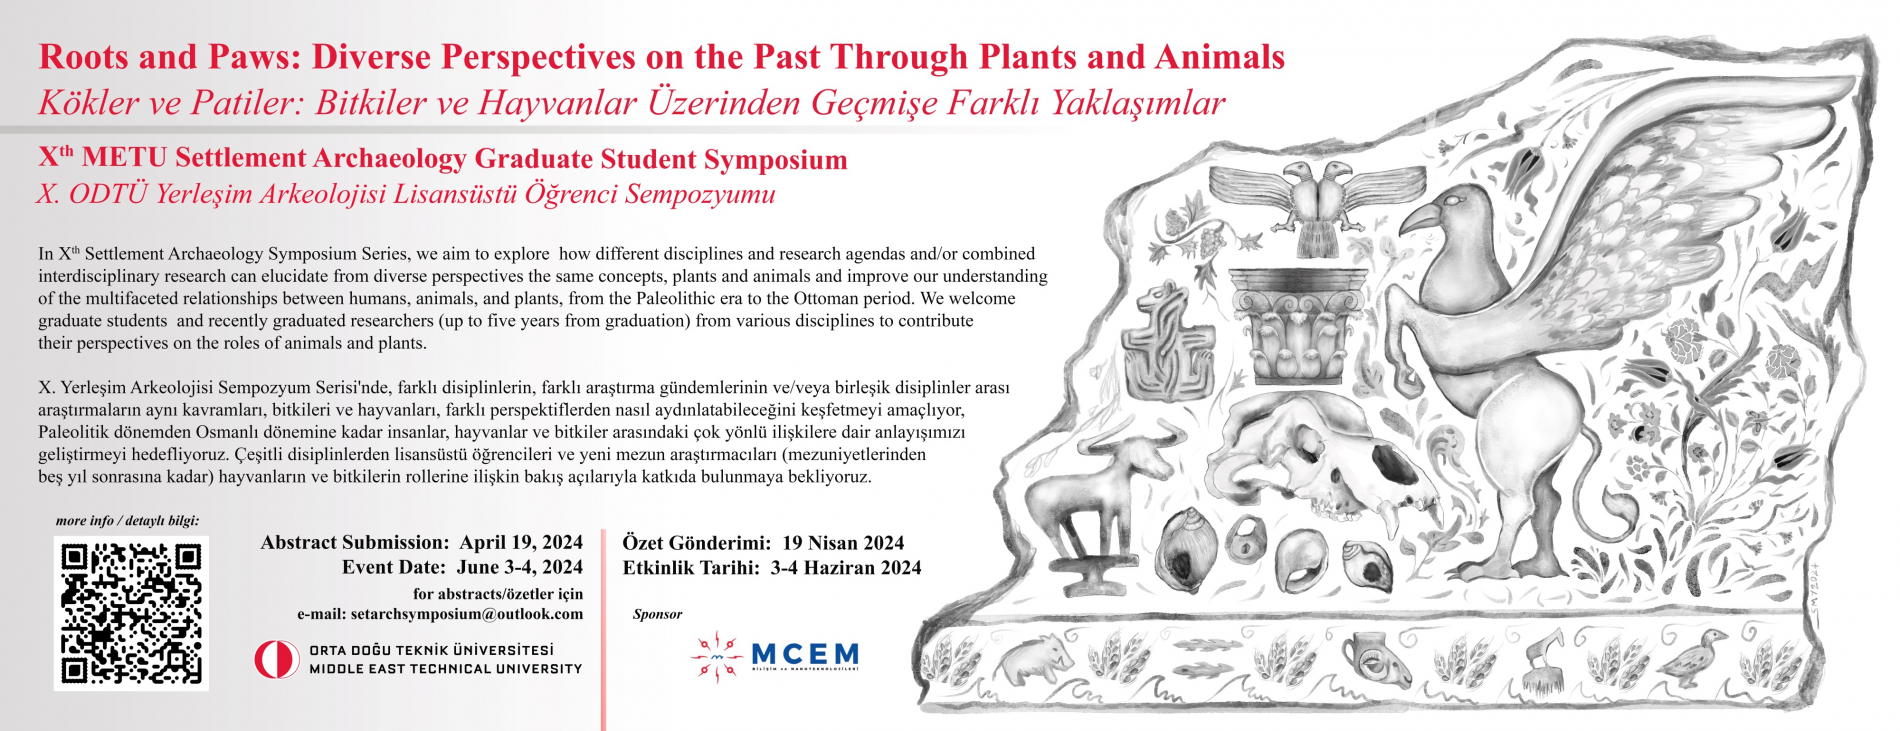 Settlement Archaeology Symposium Series X: Roots and Paws: Diverse Perspectives on the Past Through Plants and Animals